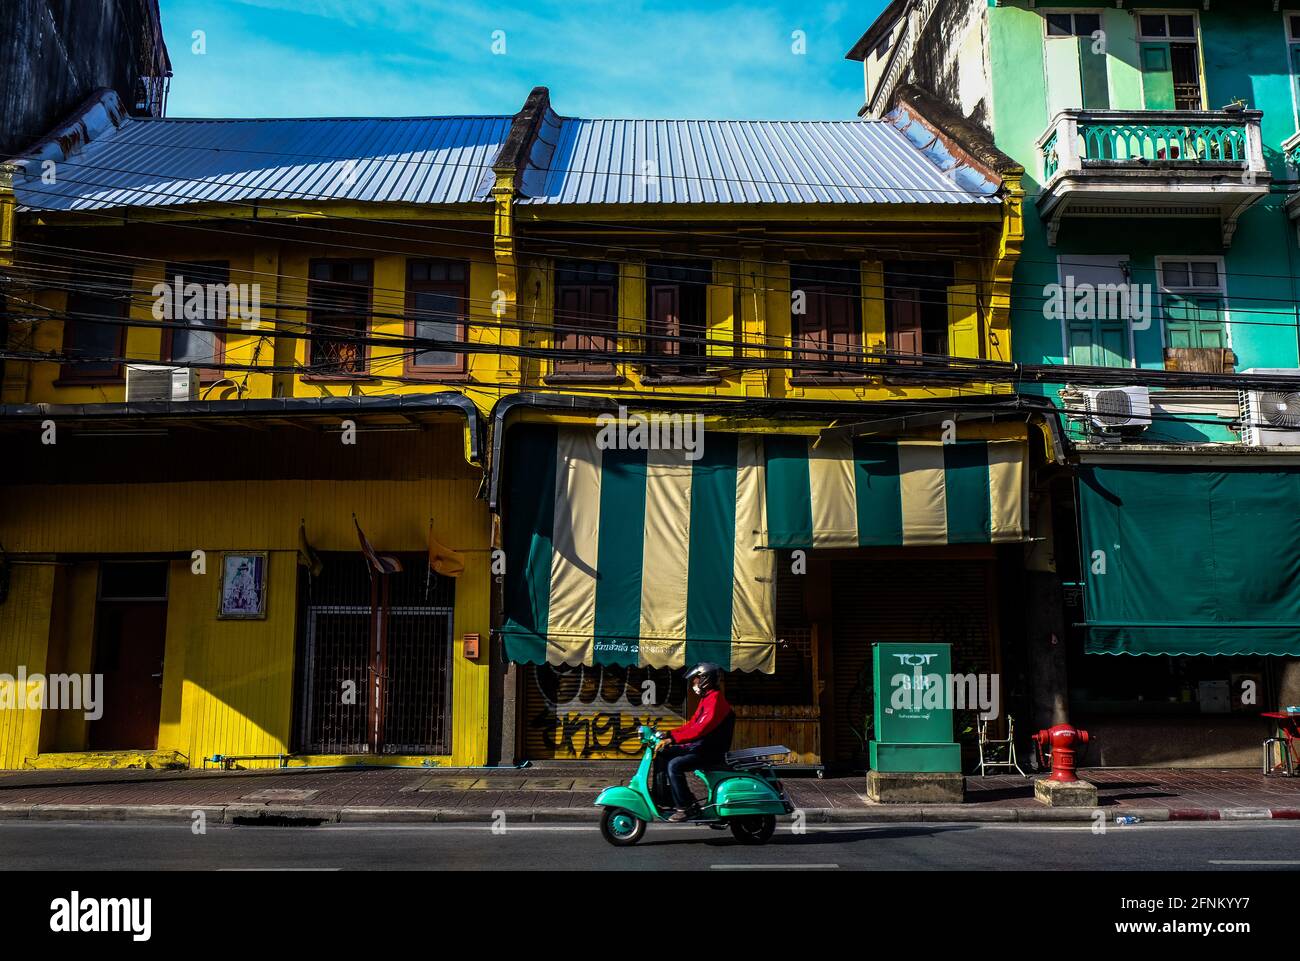 A man on an old green Vespa scooter rides past a restored yellow colored shopfront in the Chinatown area of Bangkok, Thailand Stock Photo